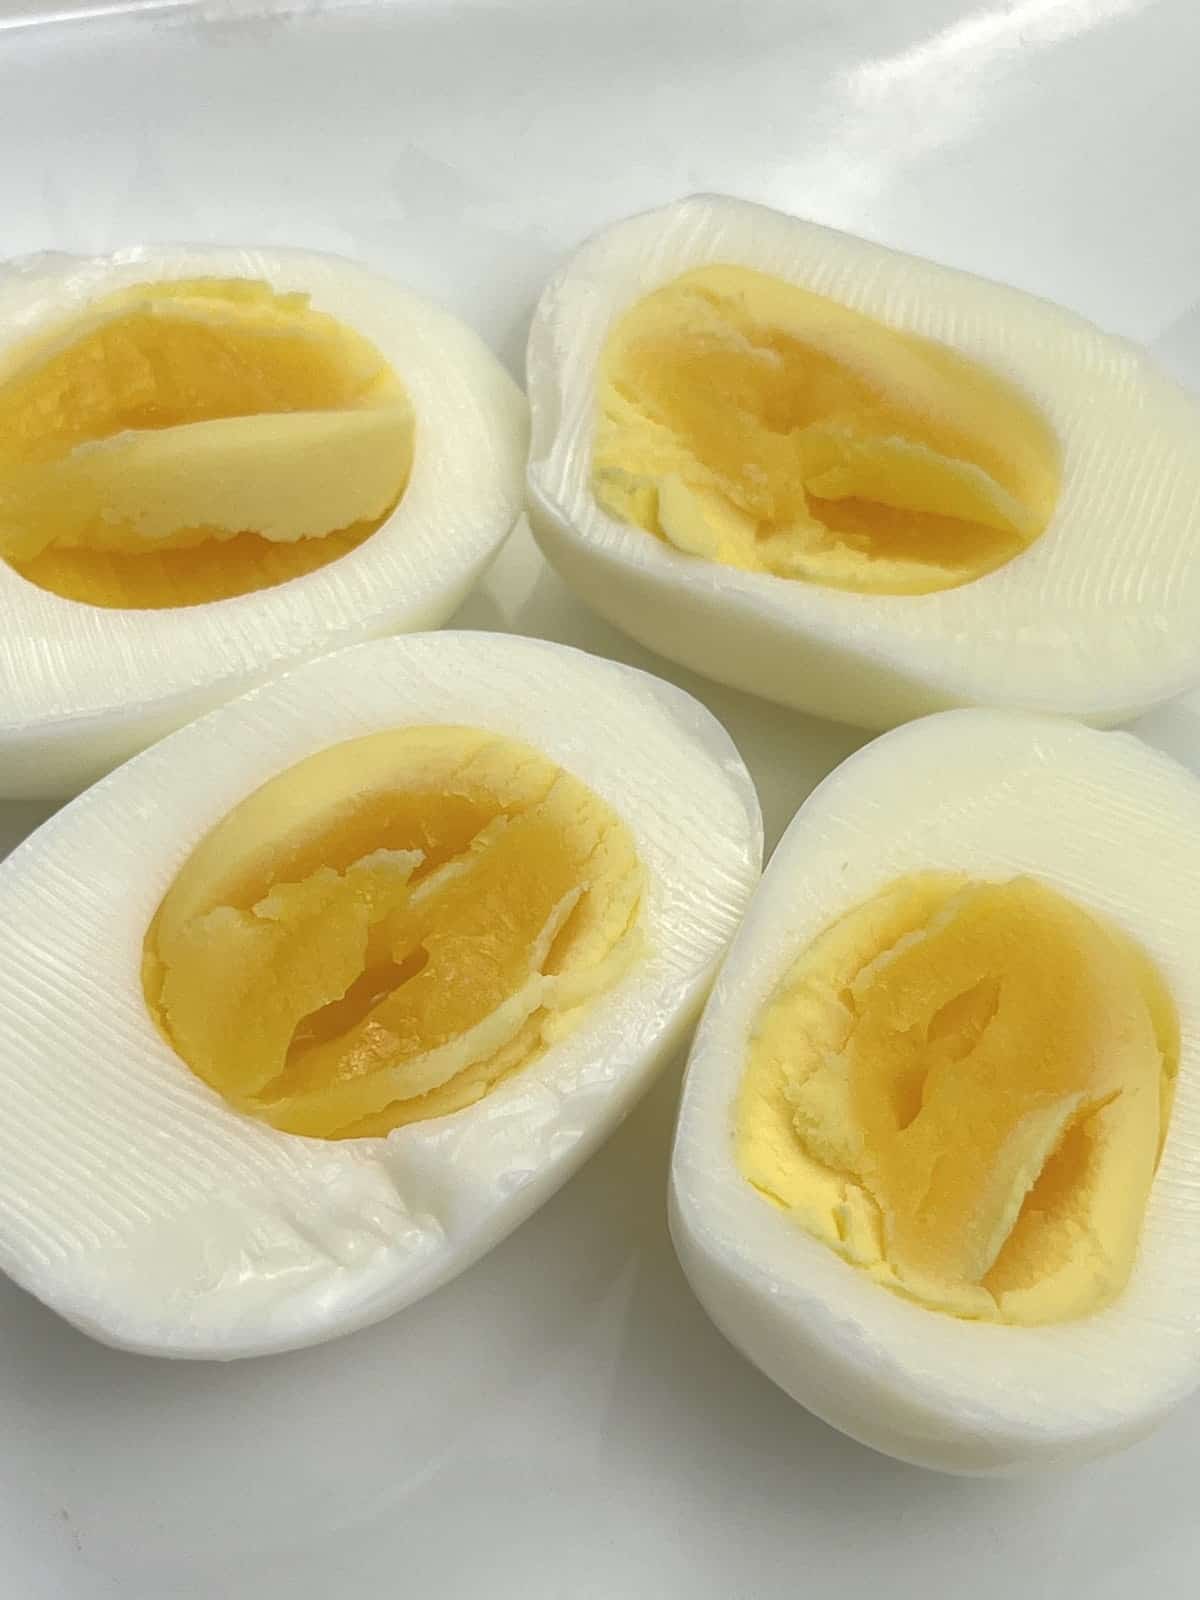 Hard-boiled eggs made in an instant pot, sliced in half